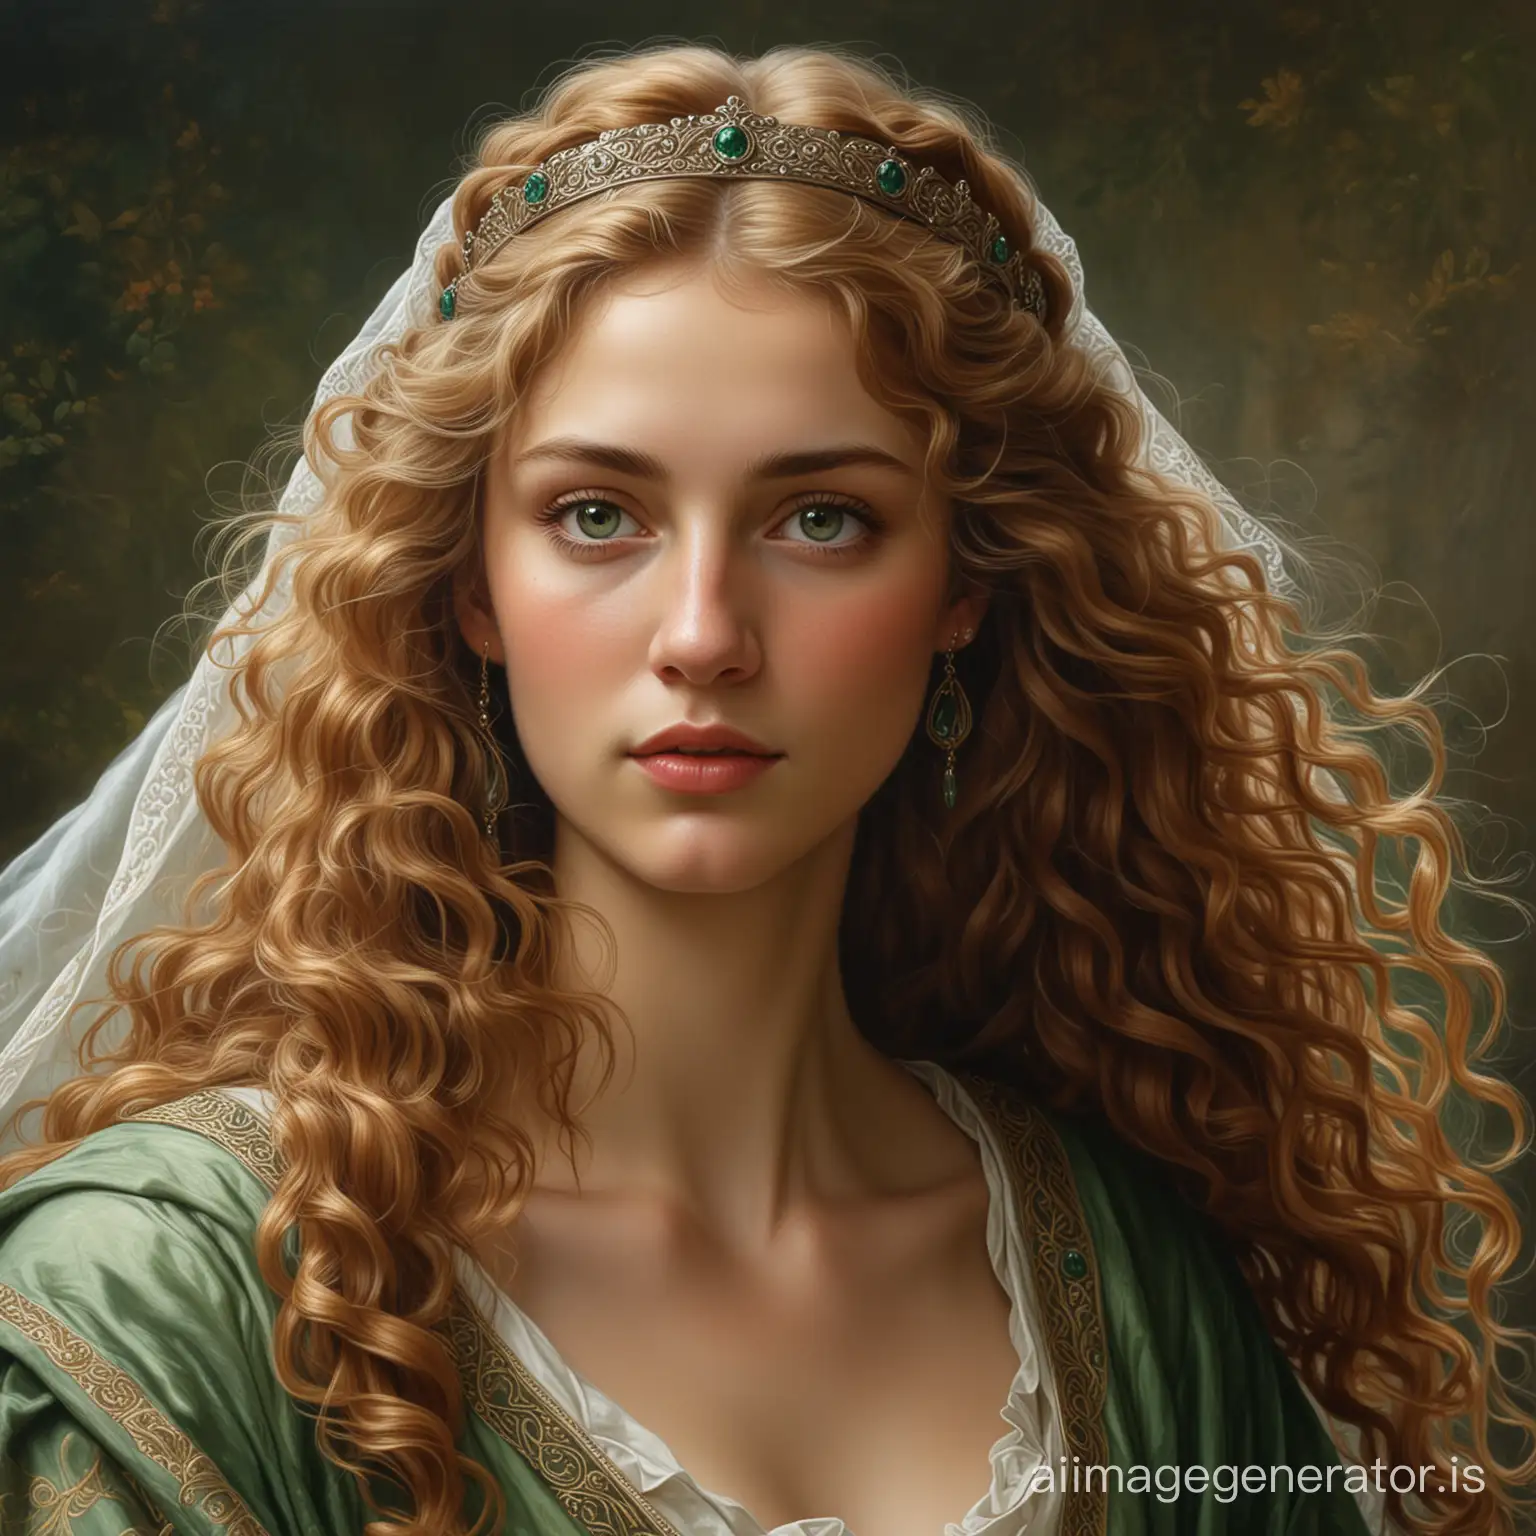  Ultra realistic oil on canvas of a  princess wearing a noble roman she has fair skin with a cool undertone and light brown voluminous curly long hair she is tunic she looking slightly upwards she wears a veil around her hair she wears  she has green dreamy eyes do not add makeup use pre raphaelite techniques 